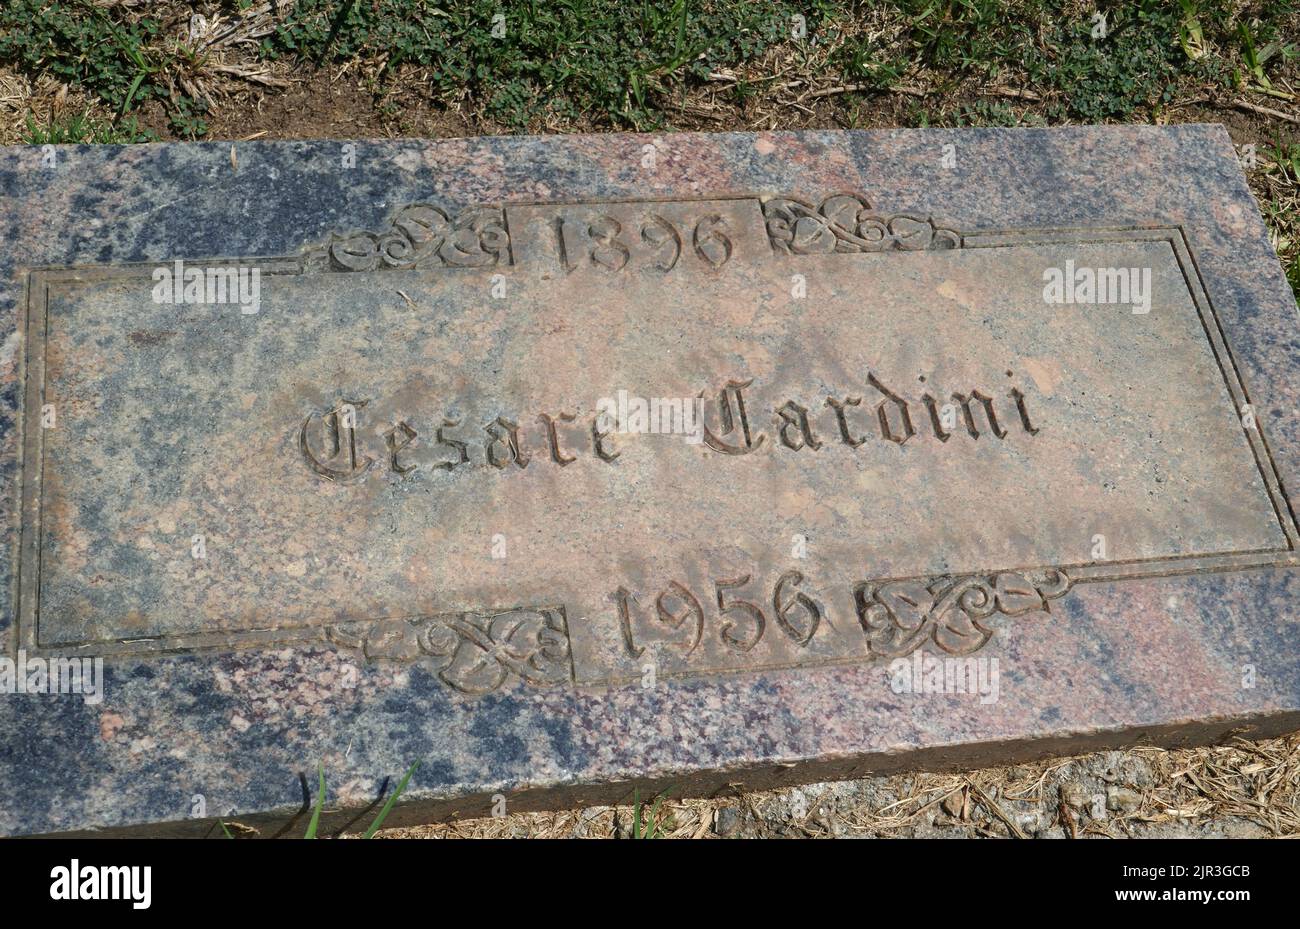 Inglewood, California, USA 19th August 2022 Restaurateur/Chef Cesare Cardini, aka Caesar Cardini's Grave in Elm Section at Inglewood Park Cemetery on August 19, 2022 in Inglewood, Los Angeles, California, USA. Cesare Cardini credited with creating the Caesar Salad at his Tijuana Restaurant. Photo by Barry King/Alamy Stock Photo Stock Photo